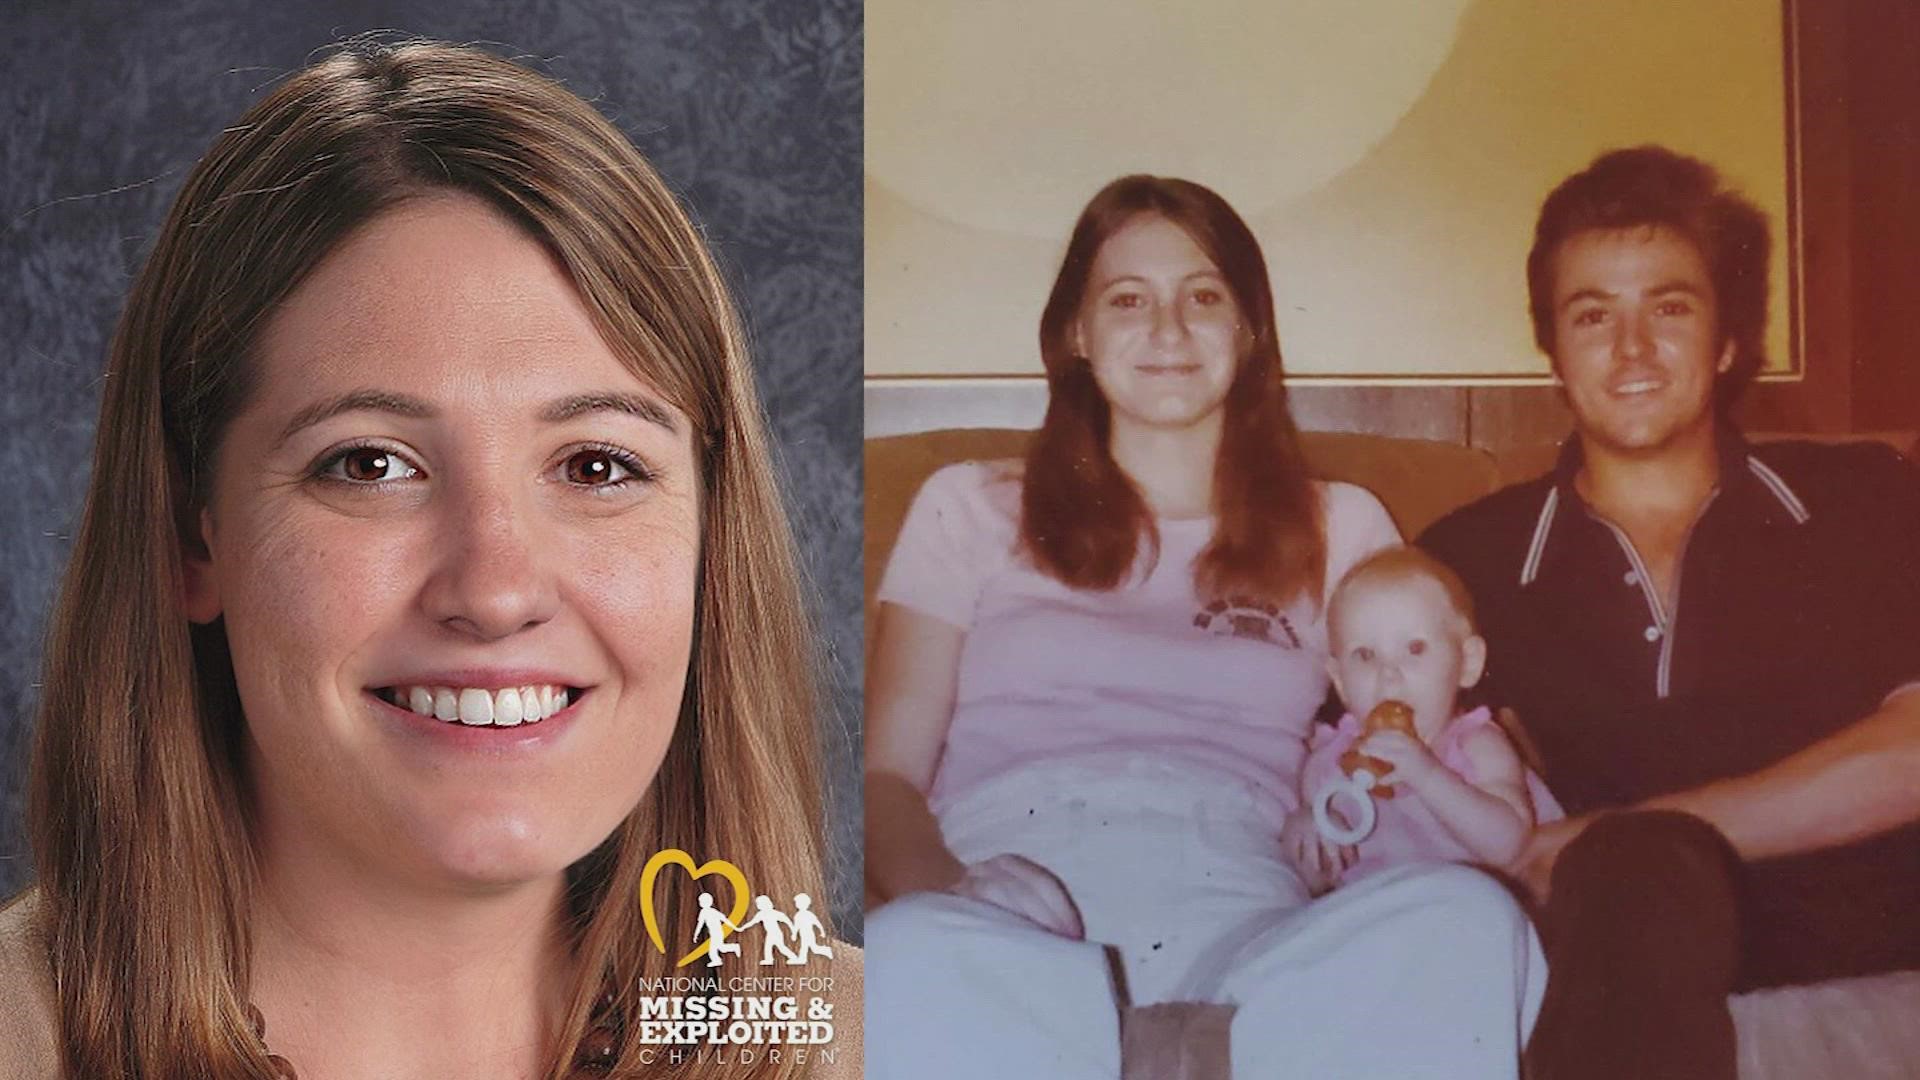 If Hollie Marie Clouse is alive, she'd be turning 42 on Jan. 24. Her parents were murdered in the early 1980s, but she was never found.